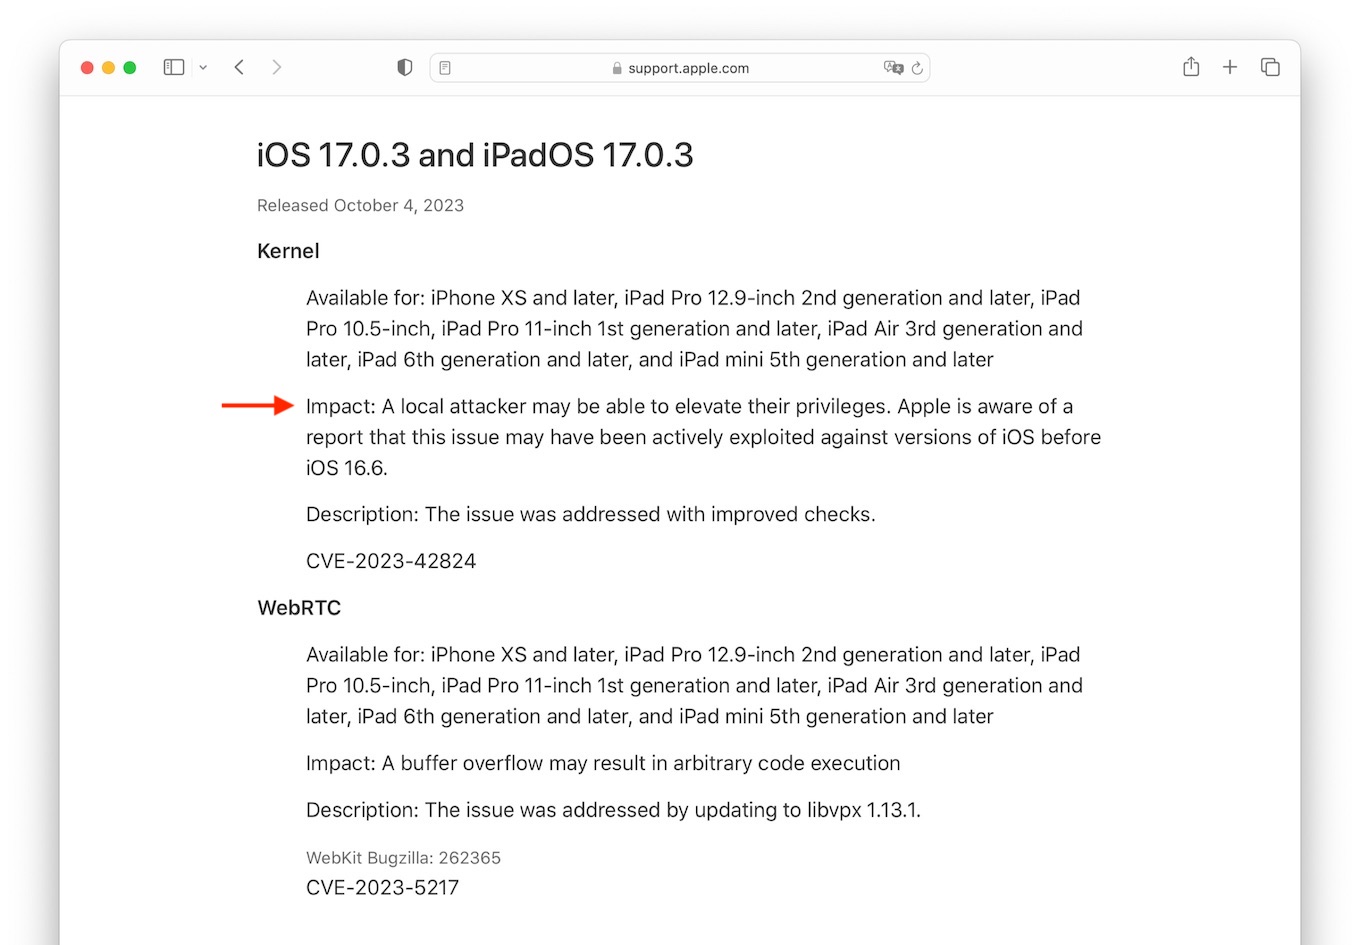 About the security content of iOS 17.0.3